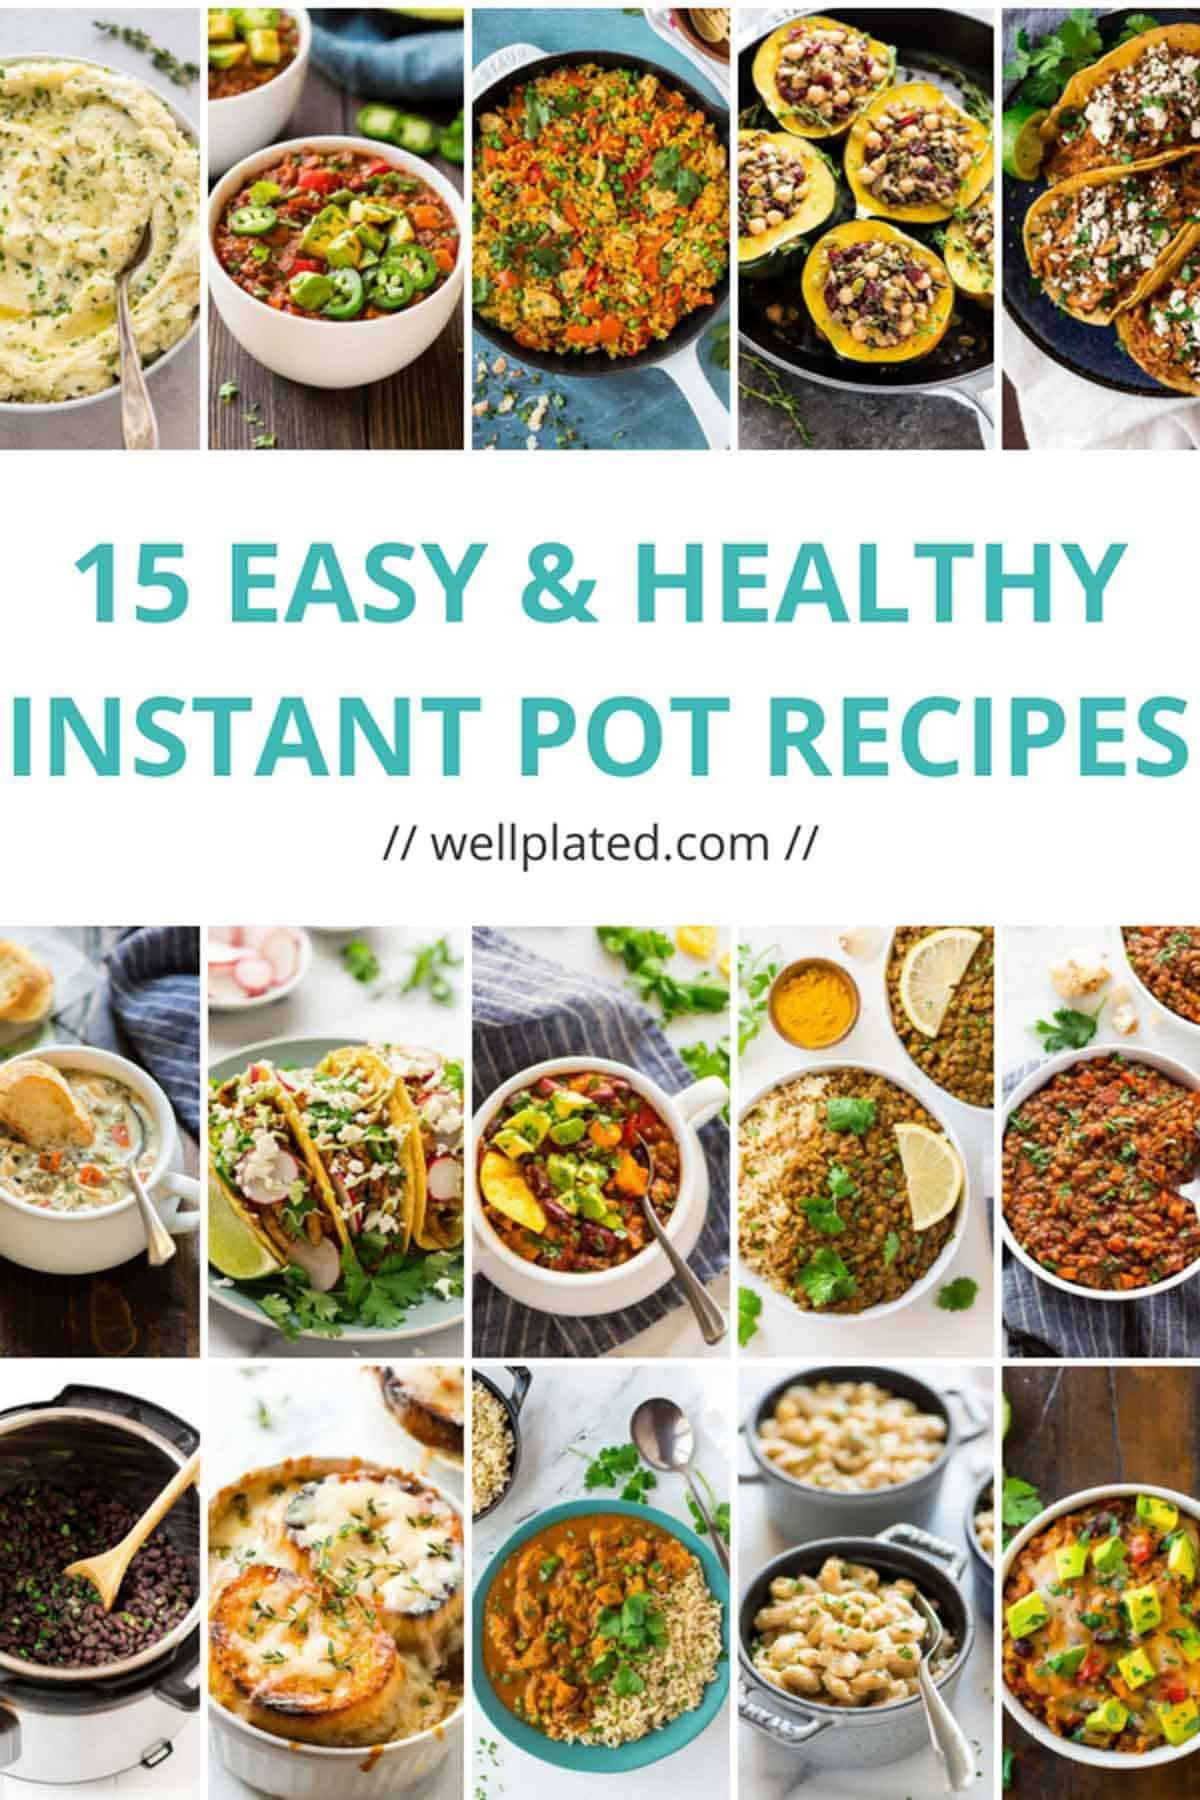 Healthy Fast Instant Pot Recipes
 15 Healthy Instant Pot Recipes That Anyone Can Make